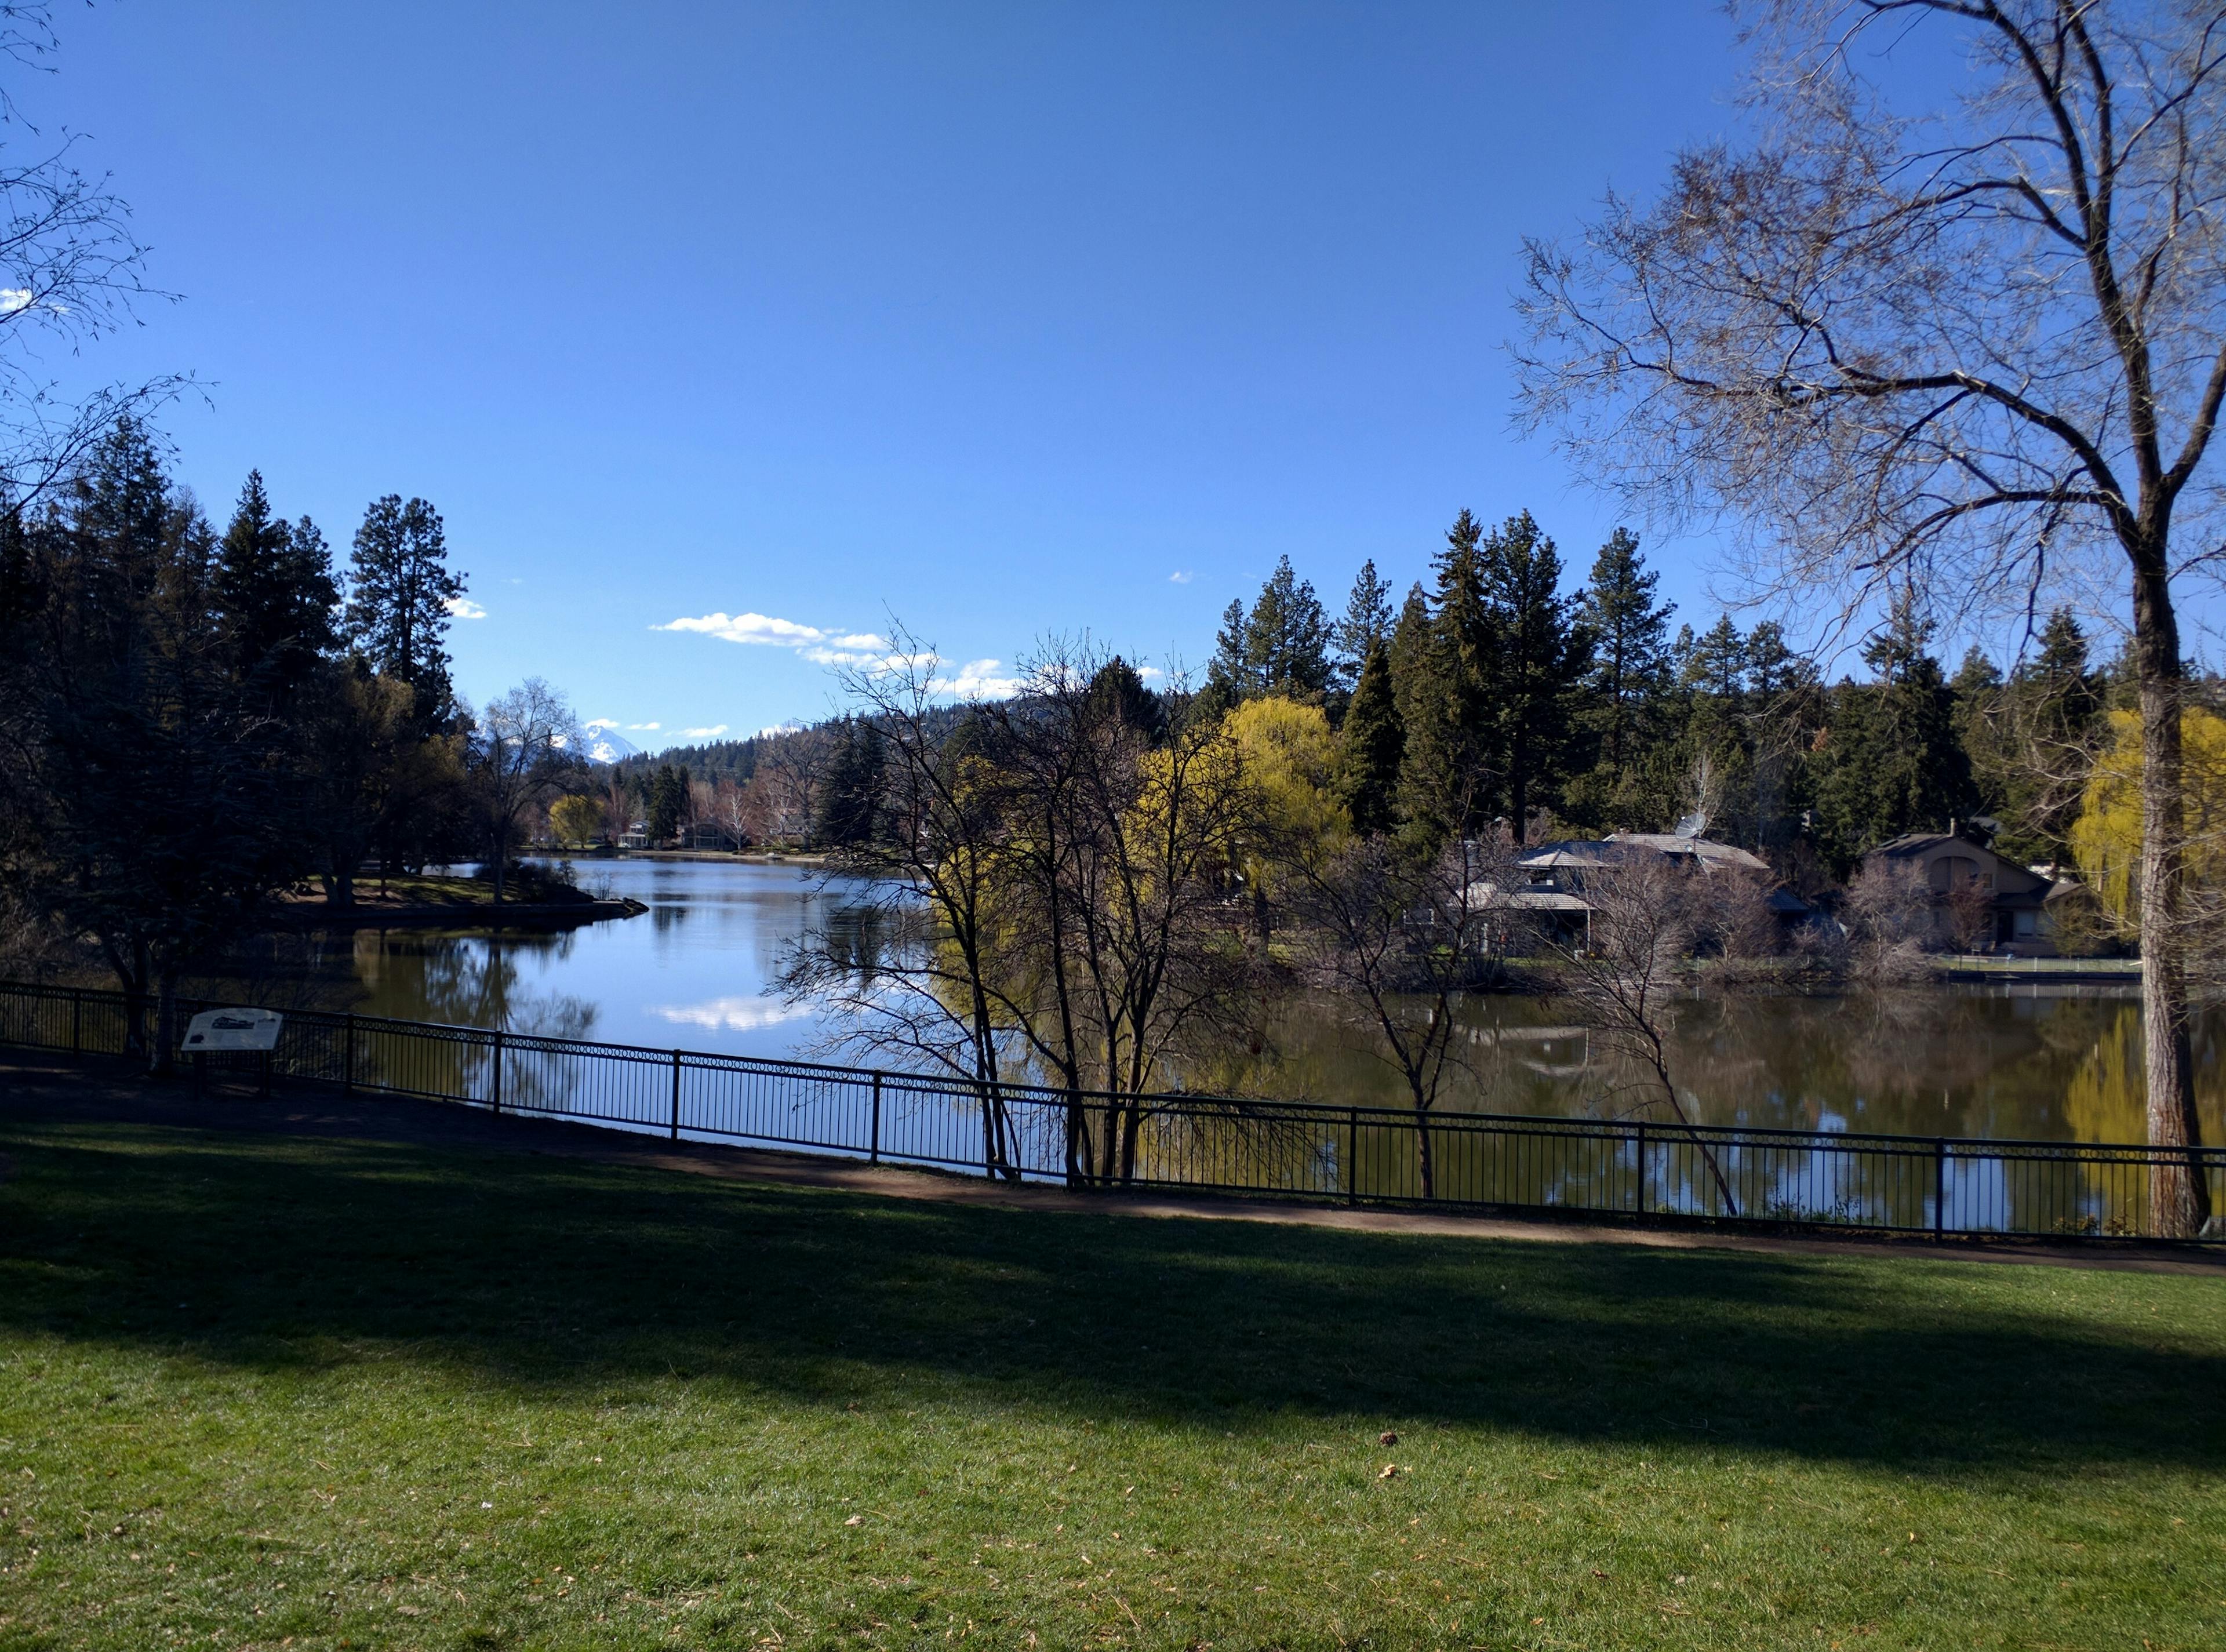 A view of a lake from a park in Bend, Oregon